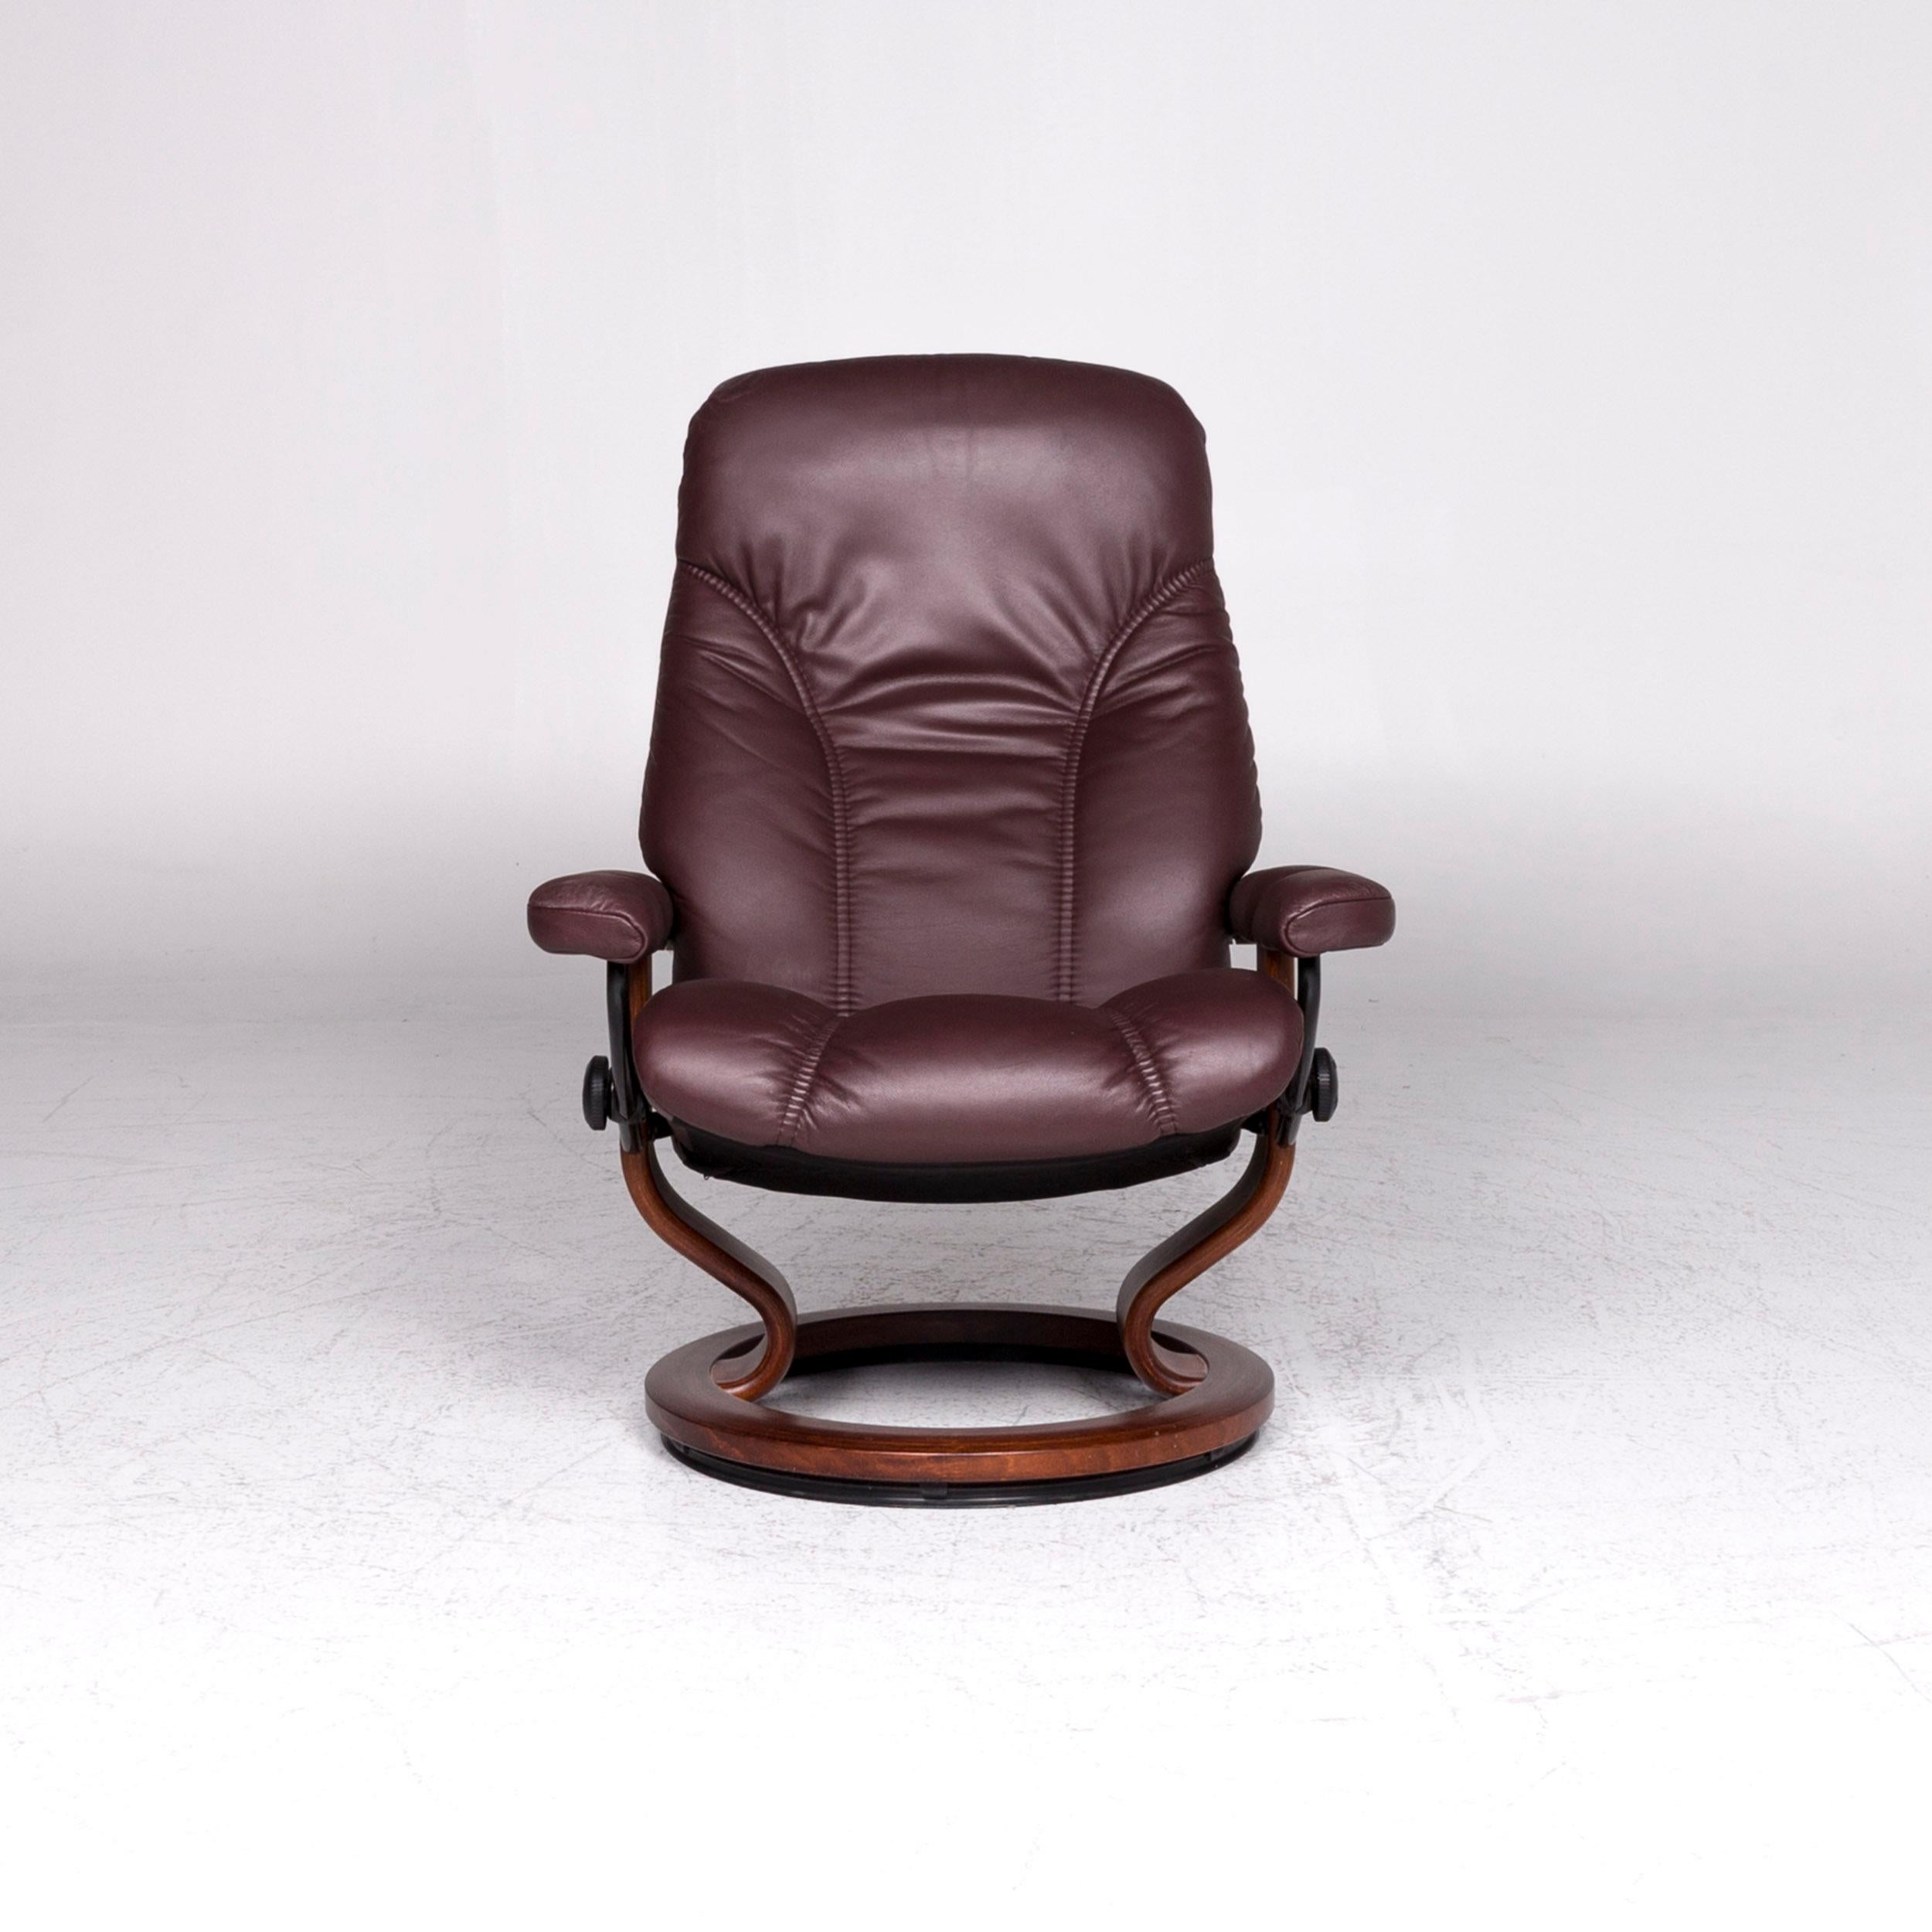 Contemporary Stressless Consul Leather Armchair Stool Red-Brown Relax Function